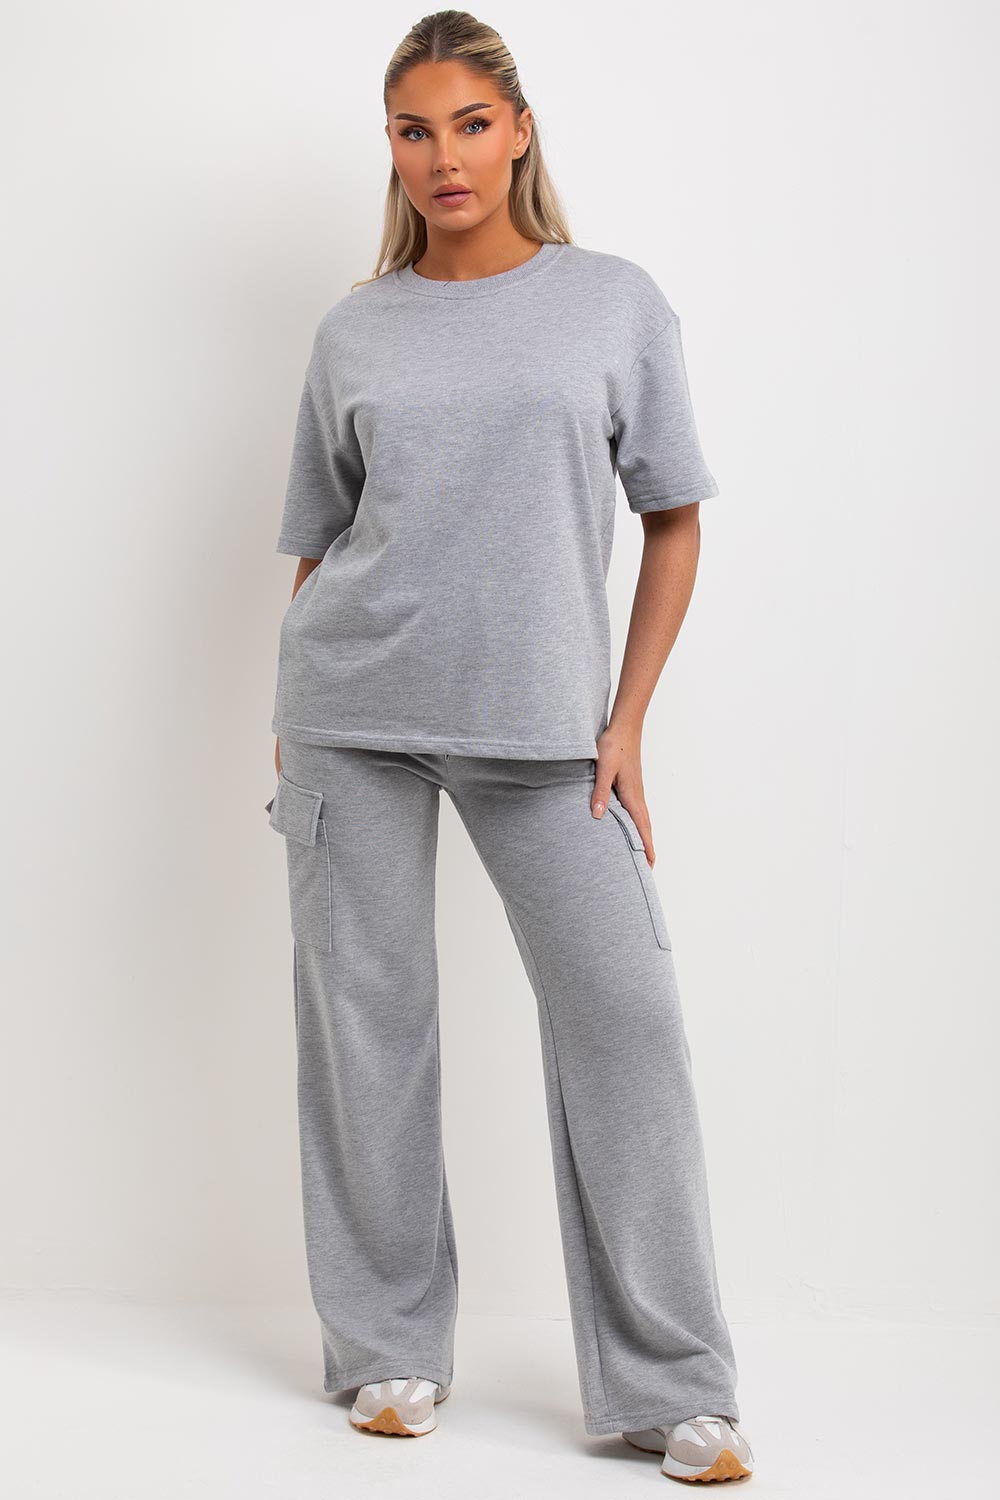 womens loungewear wide leg trousers and t shirt co ord set